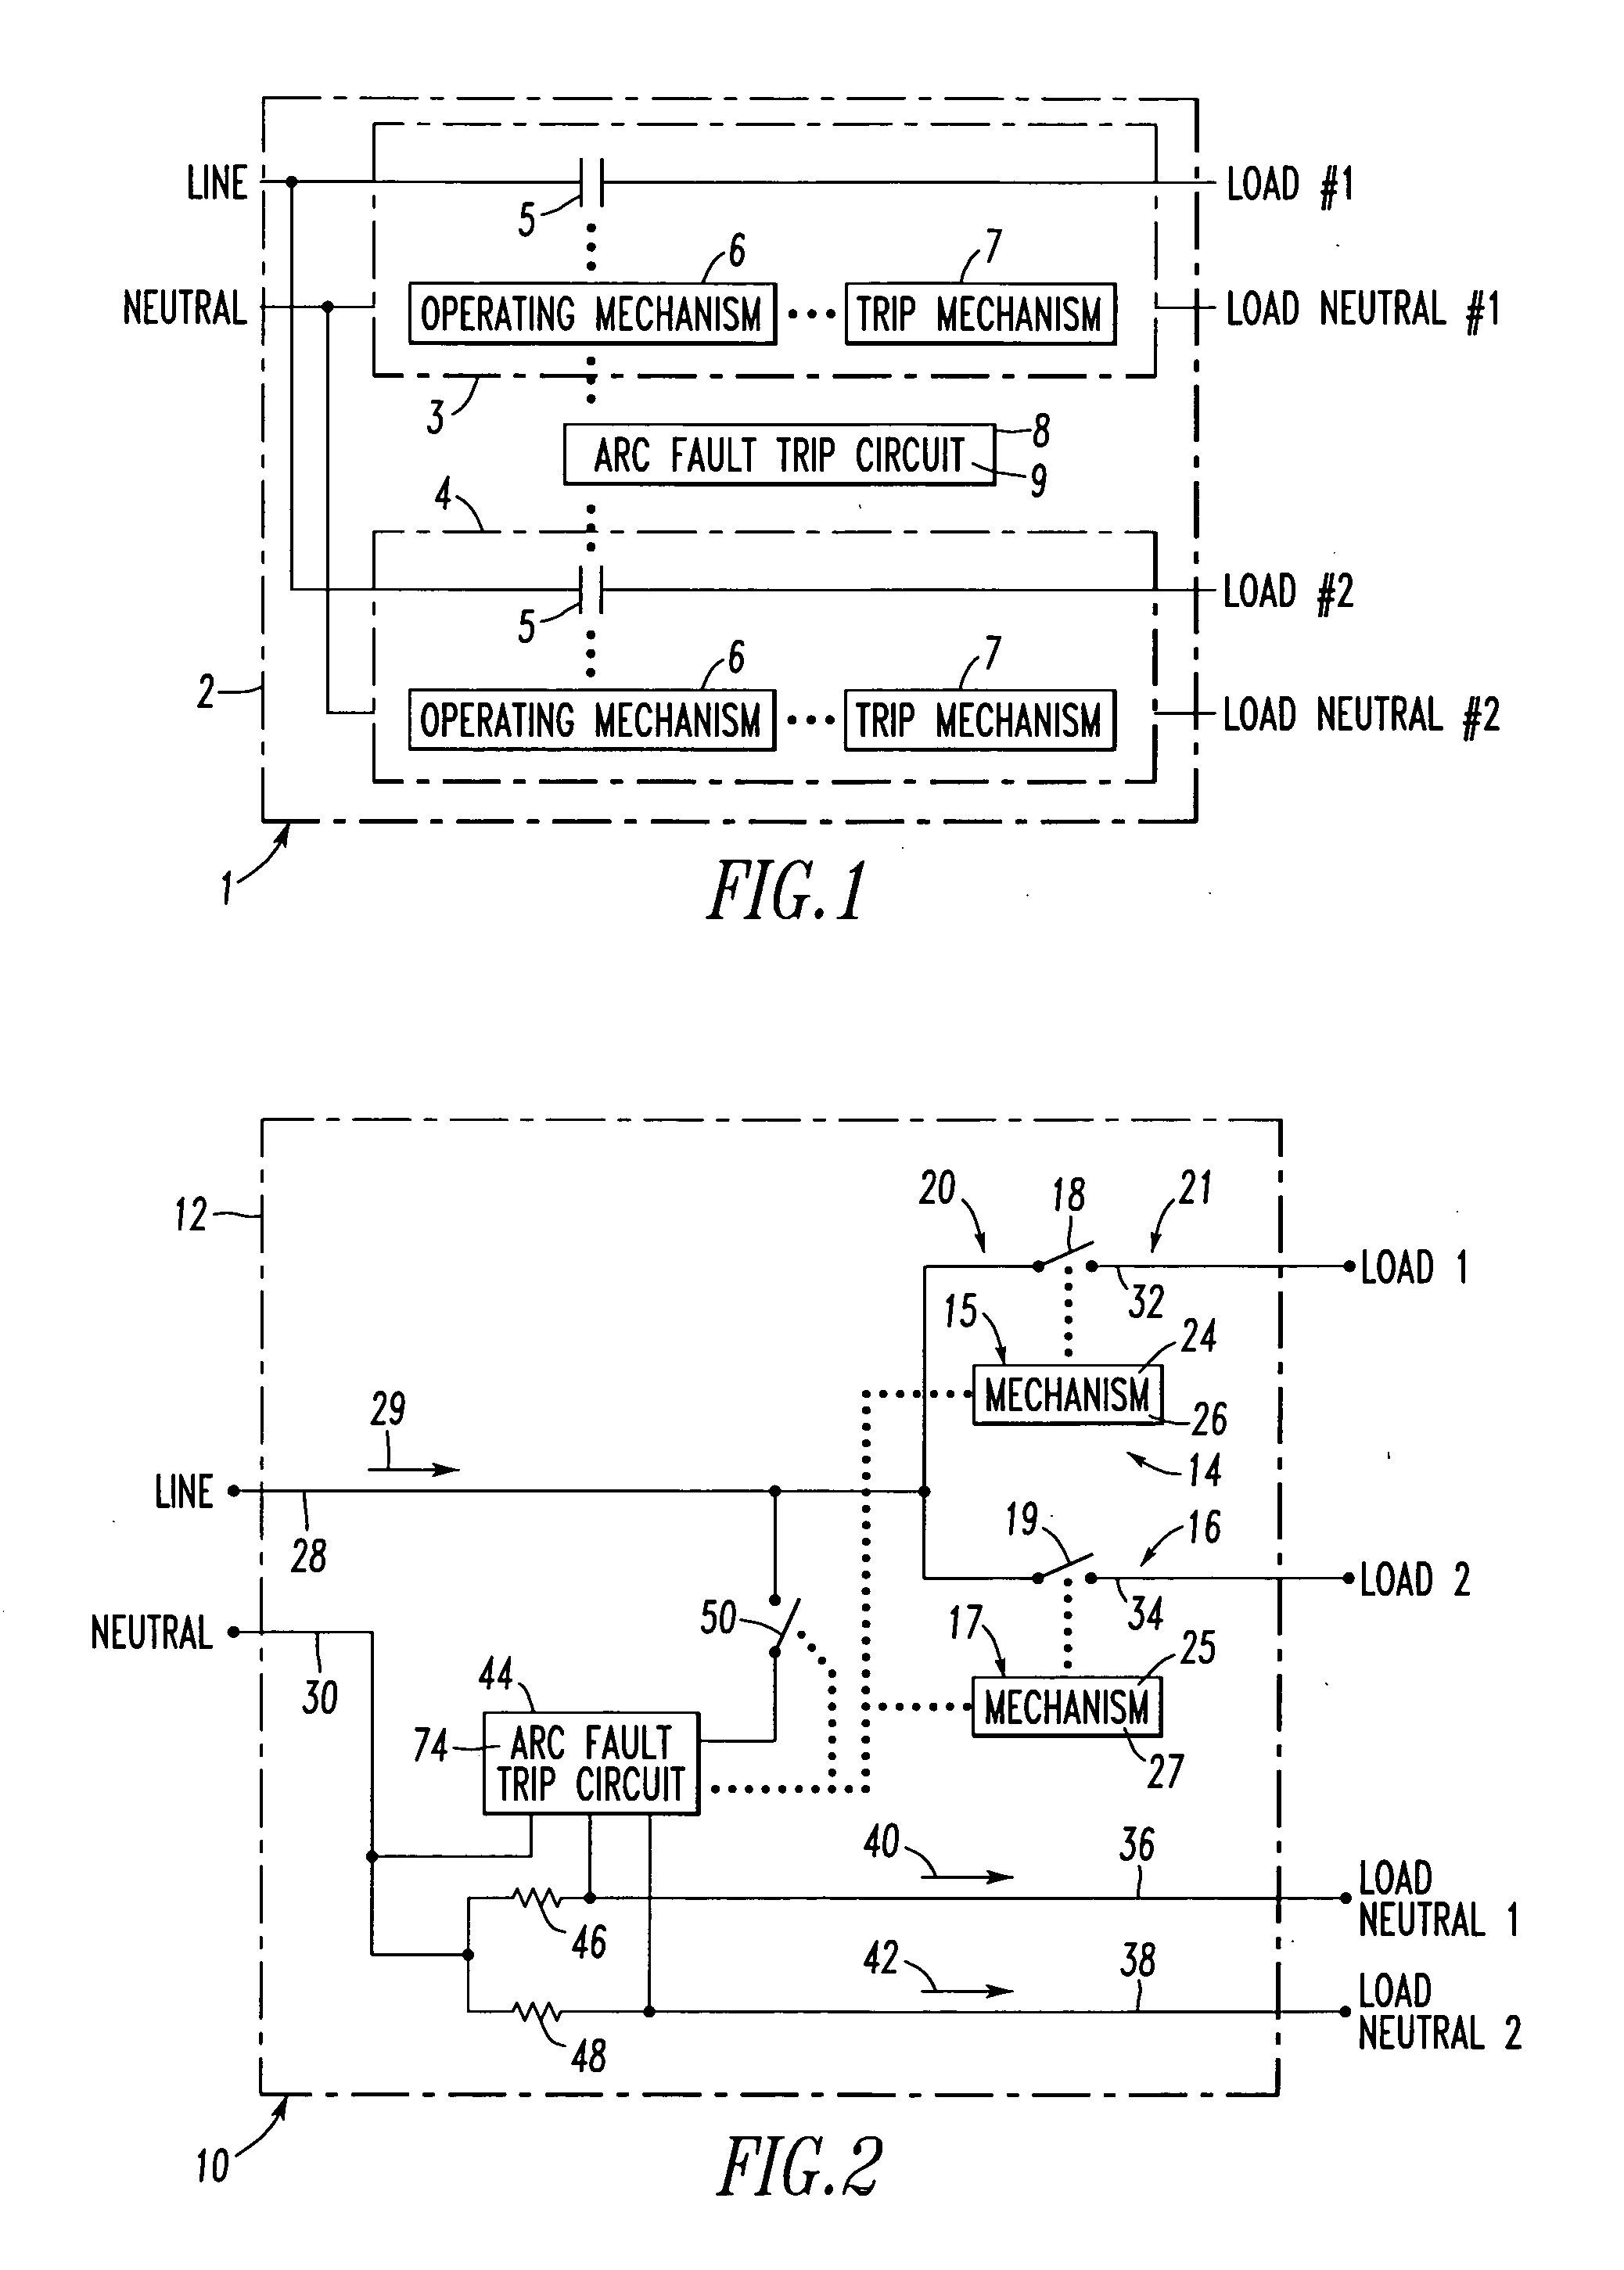 Two pole circuit interrupter employing a single arc fault or ground fault trip circuit